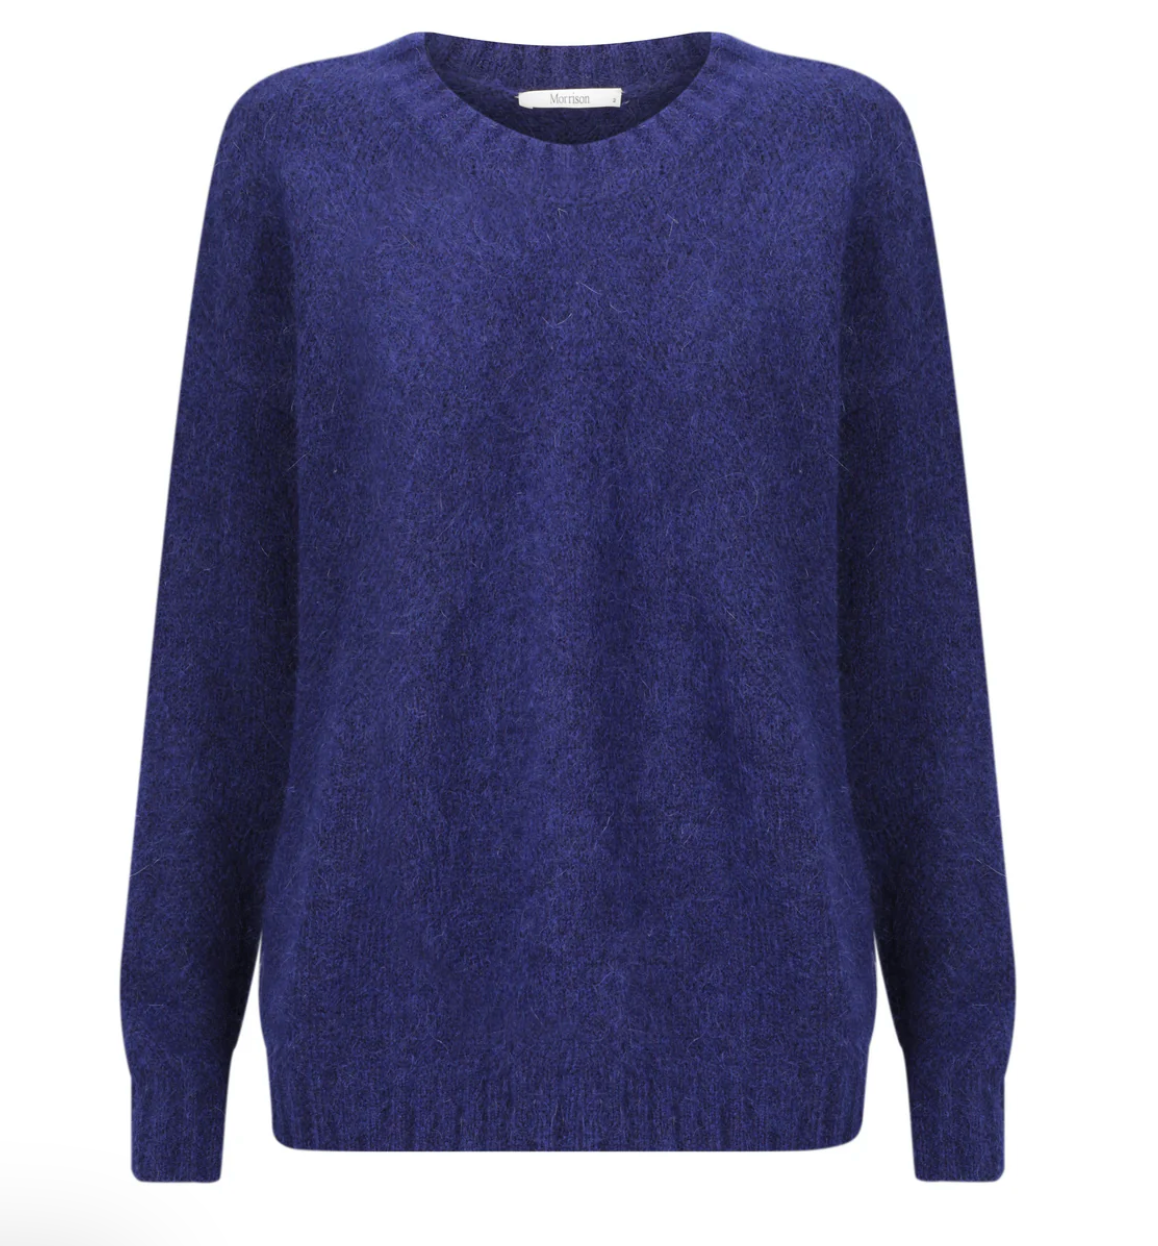 Morrison Layla Pullover was $400